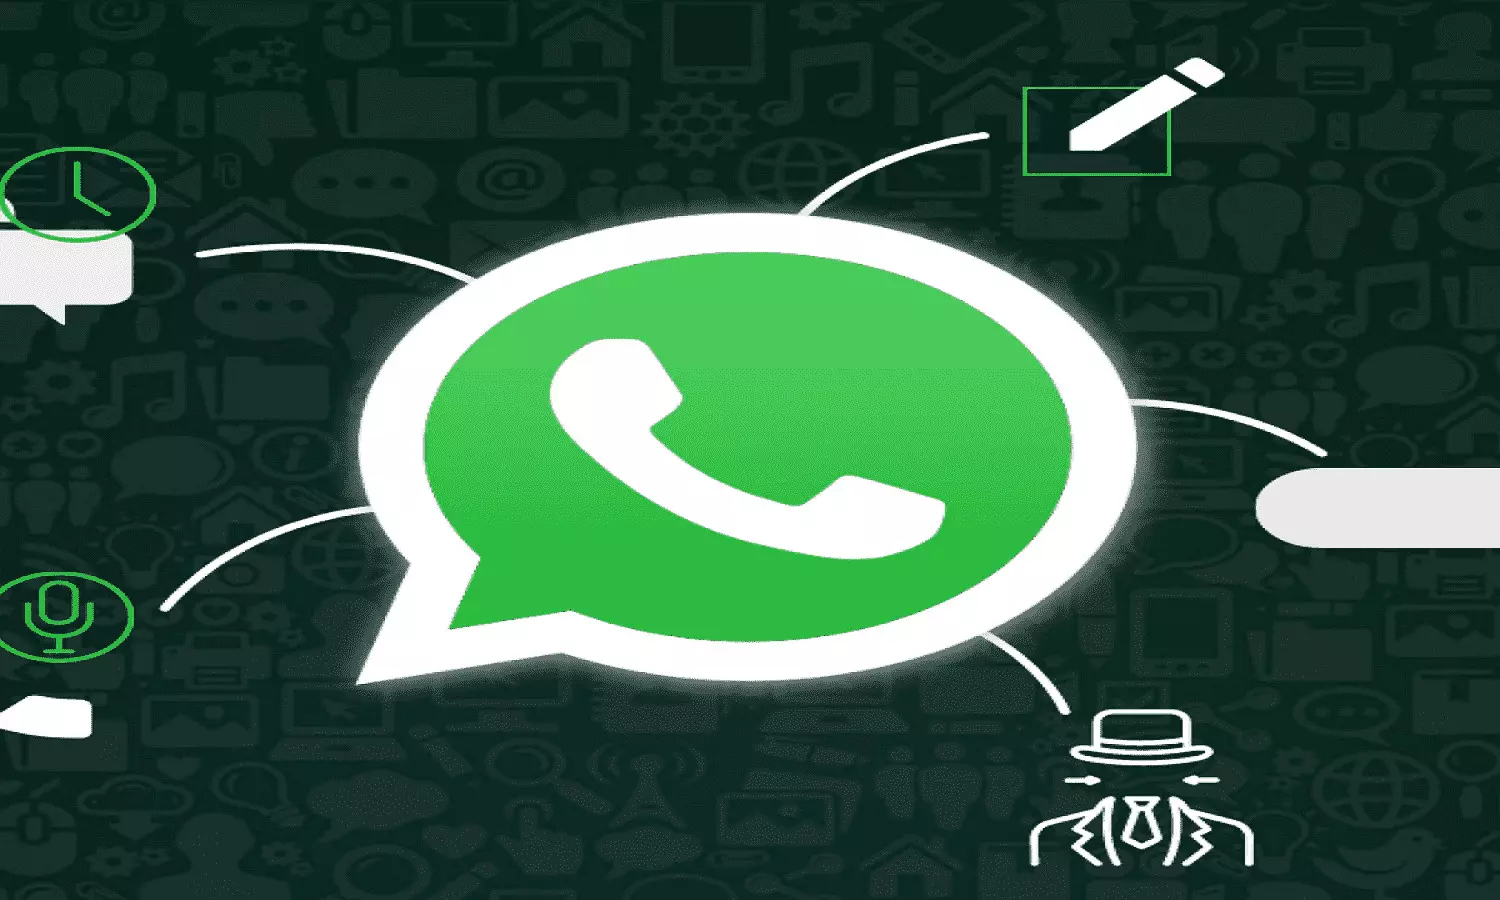 WhatsApp Upcoming Features